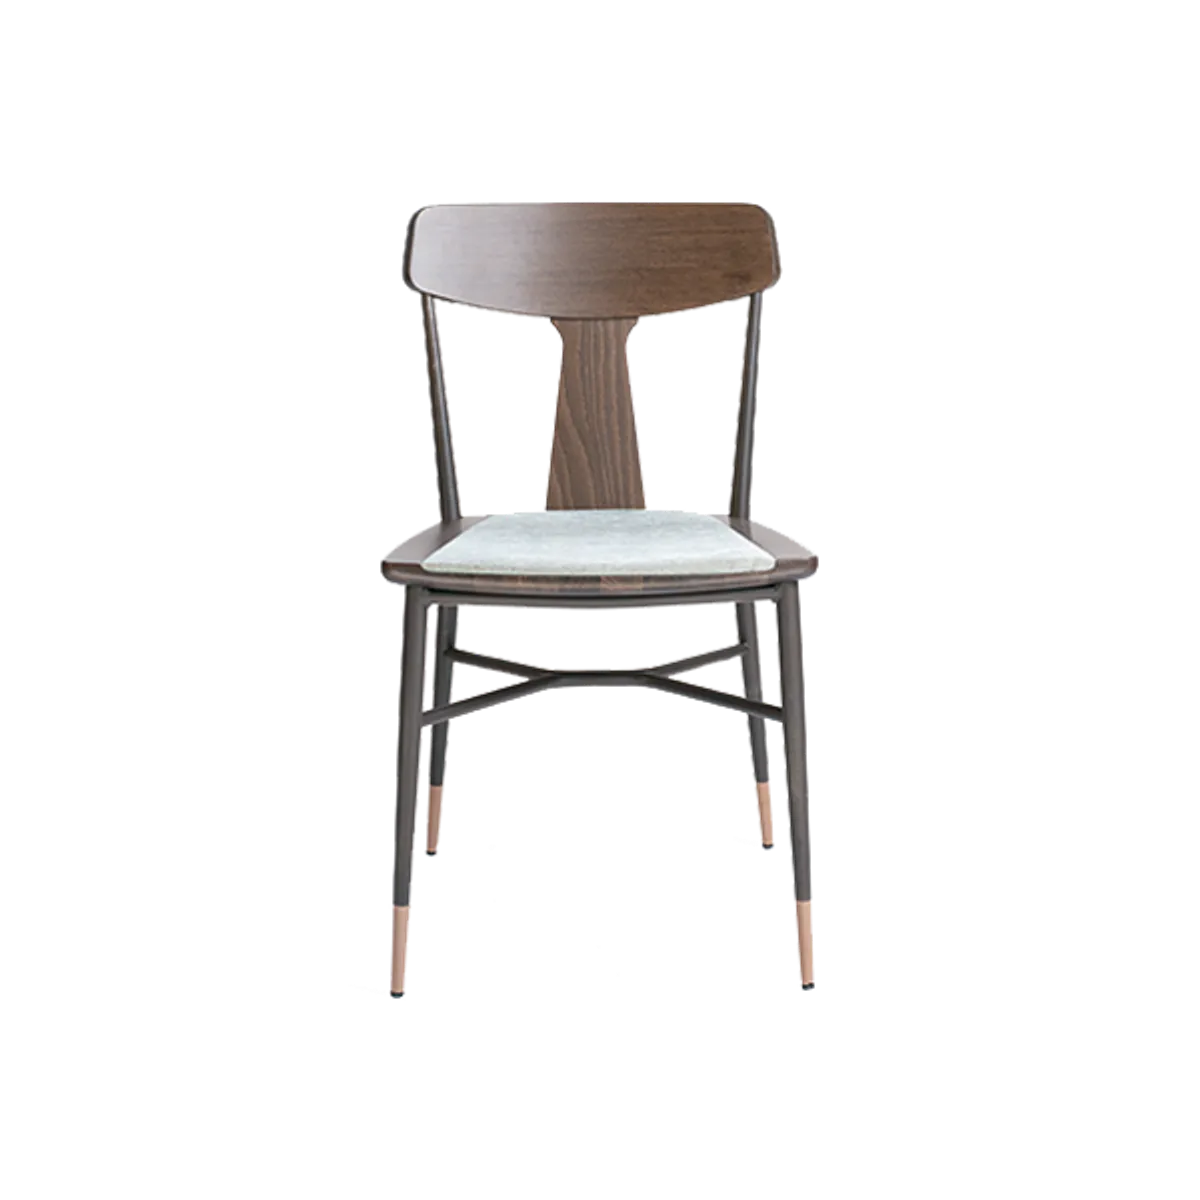 Web Agatha 3 Side Chair Hospotality Furniture Rose Gold Slipper Cups Insideoutcontracts